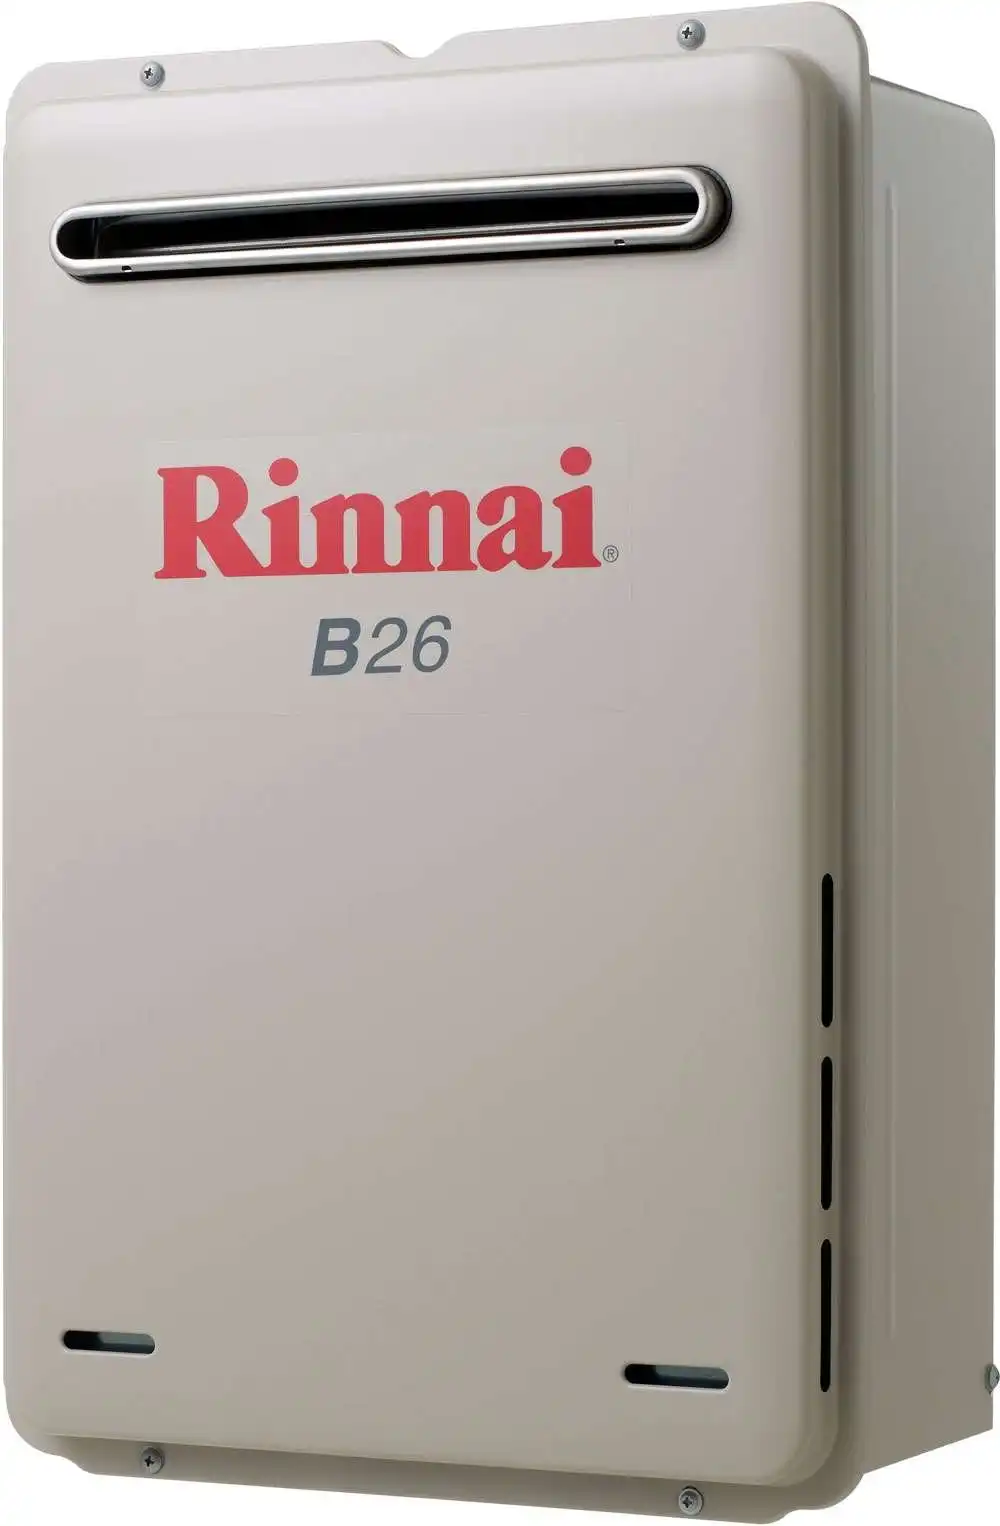 Rinnai Builders 50oC 26L Instant Hot Water System B26N50A B26 *NATURAL GAS*